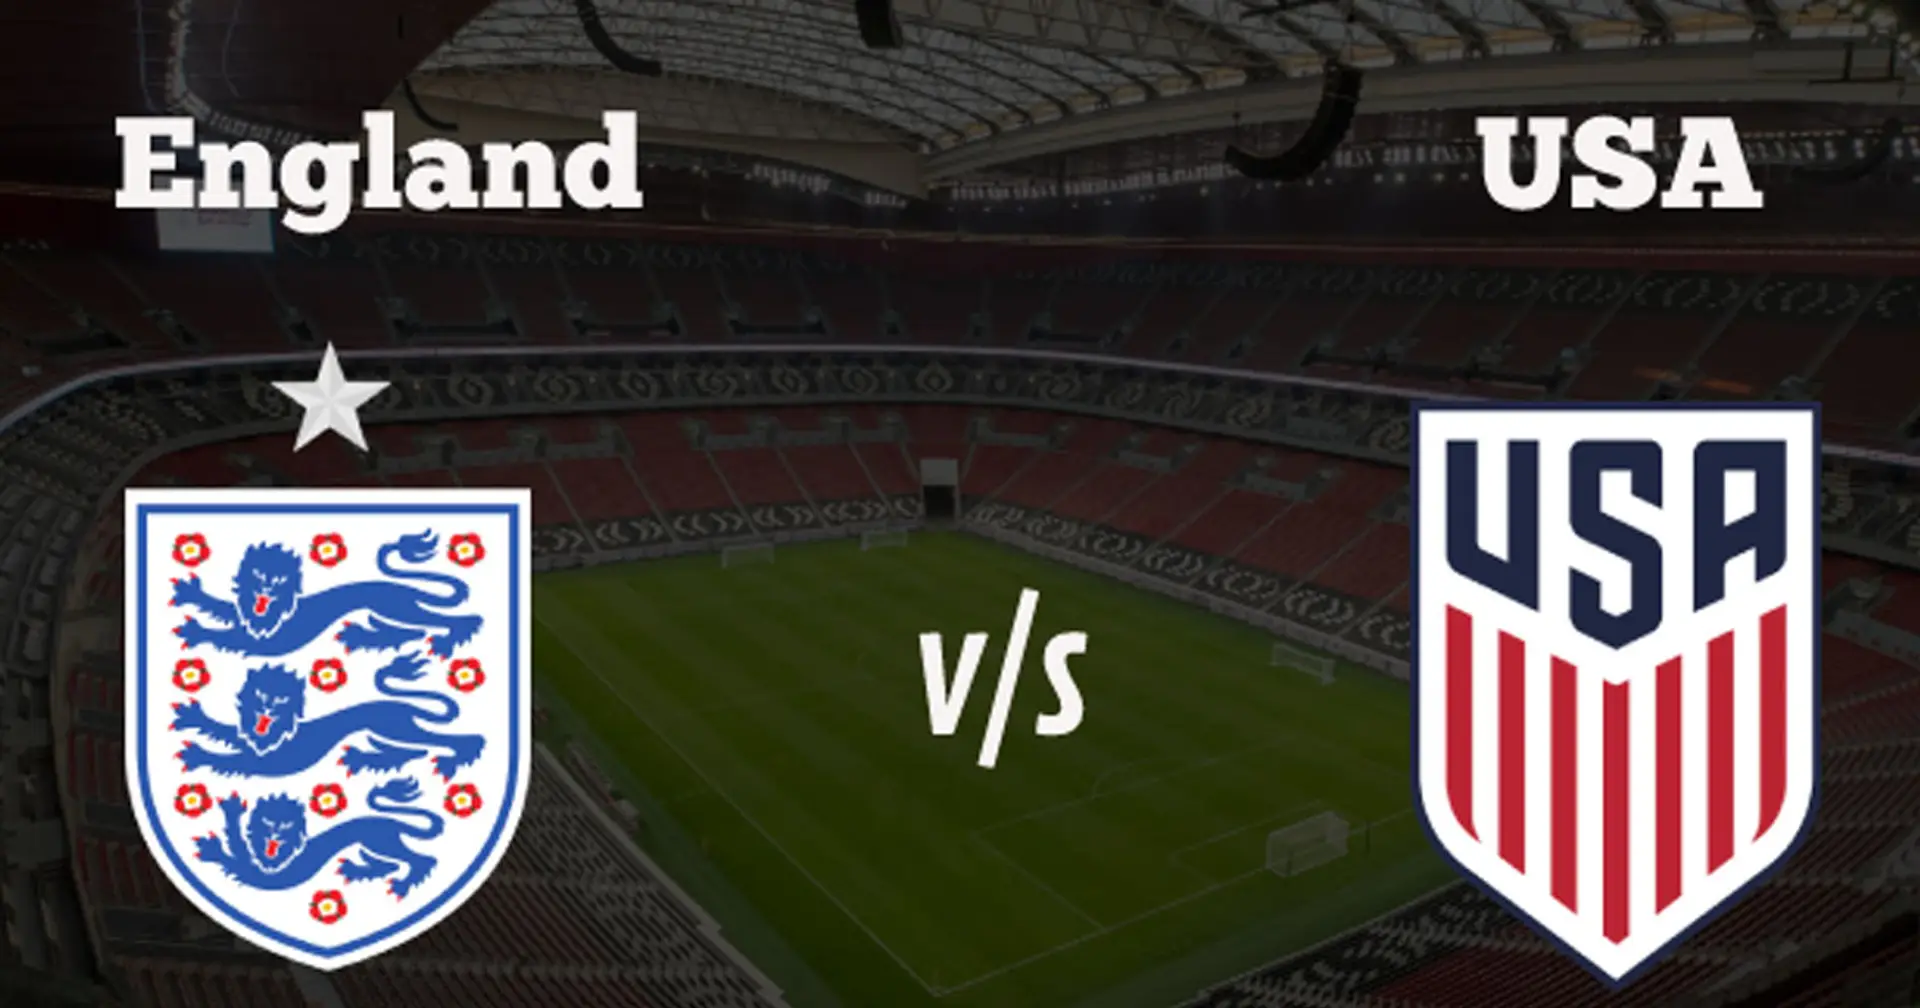 England vs USA: Official team lineups for the World Cup clash revealed